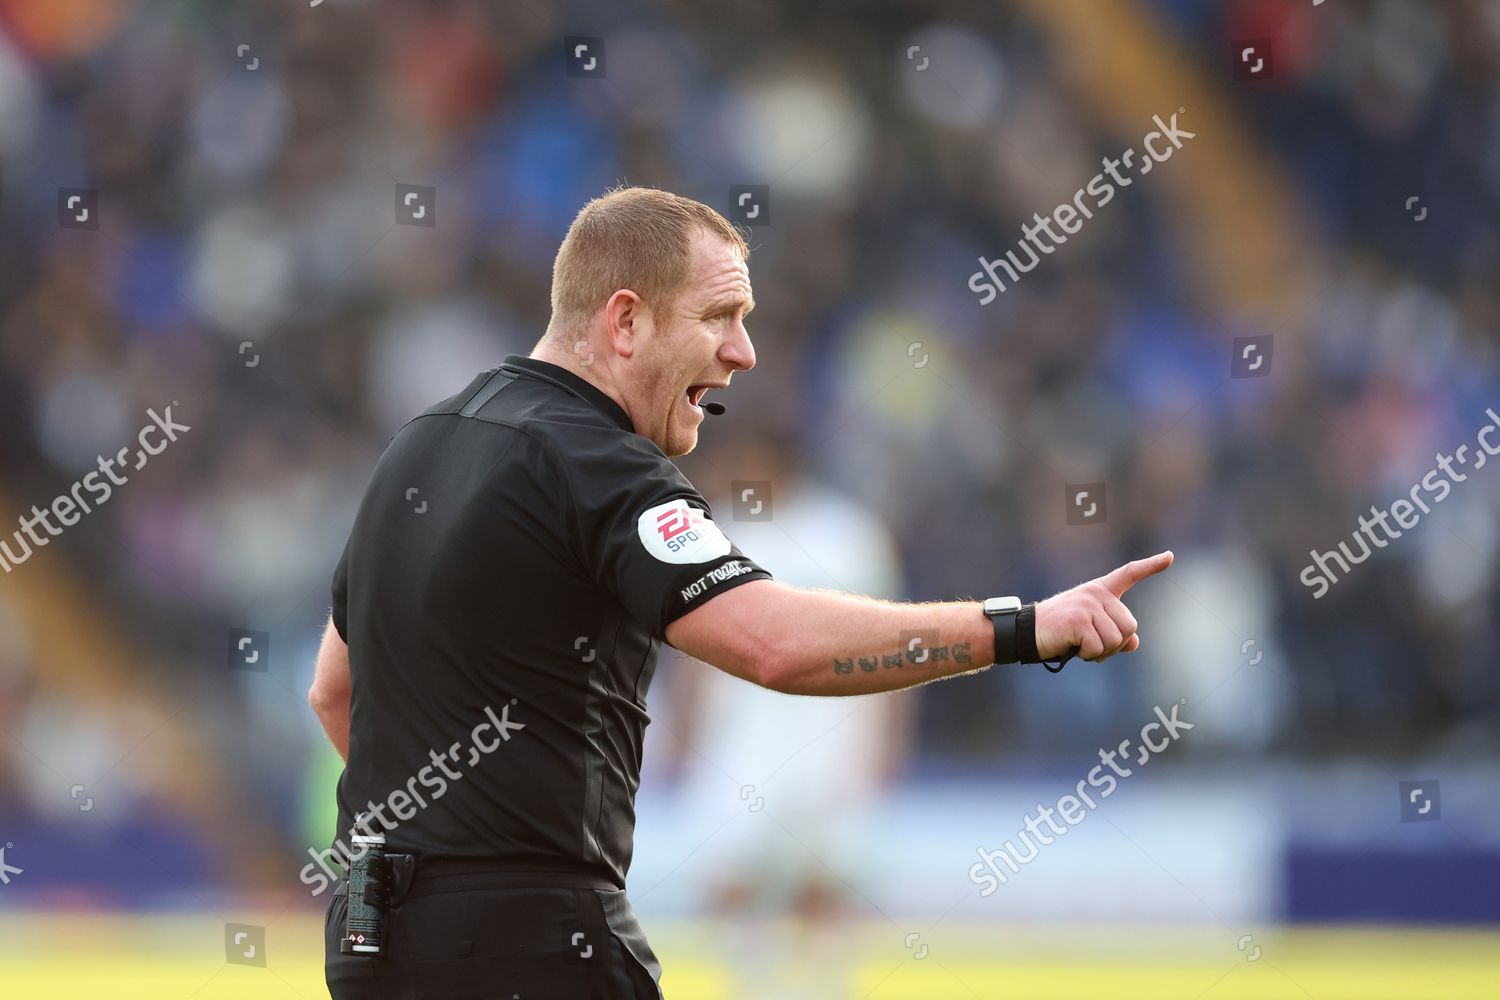 Referee Lee Swabey Editorial Stock Photo - Stock Image | Shutterstock